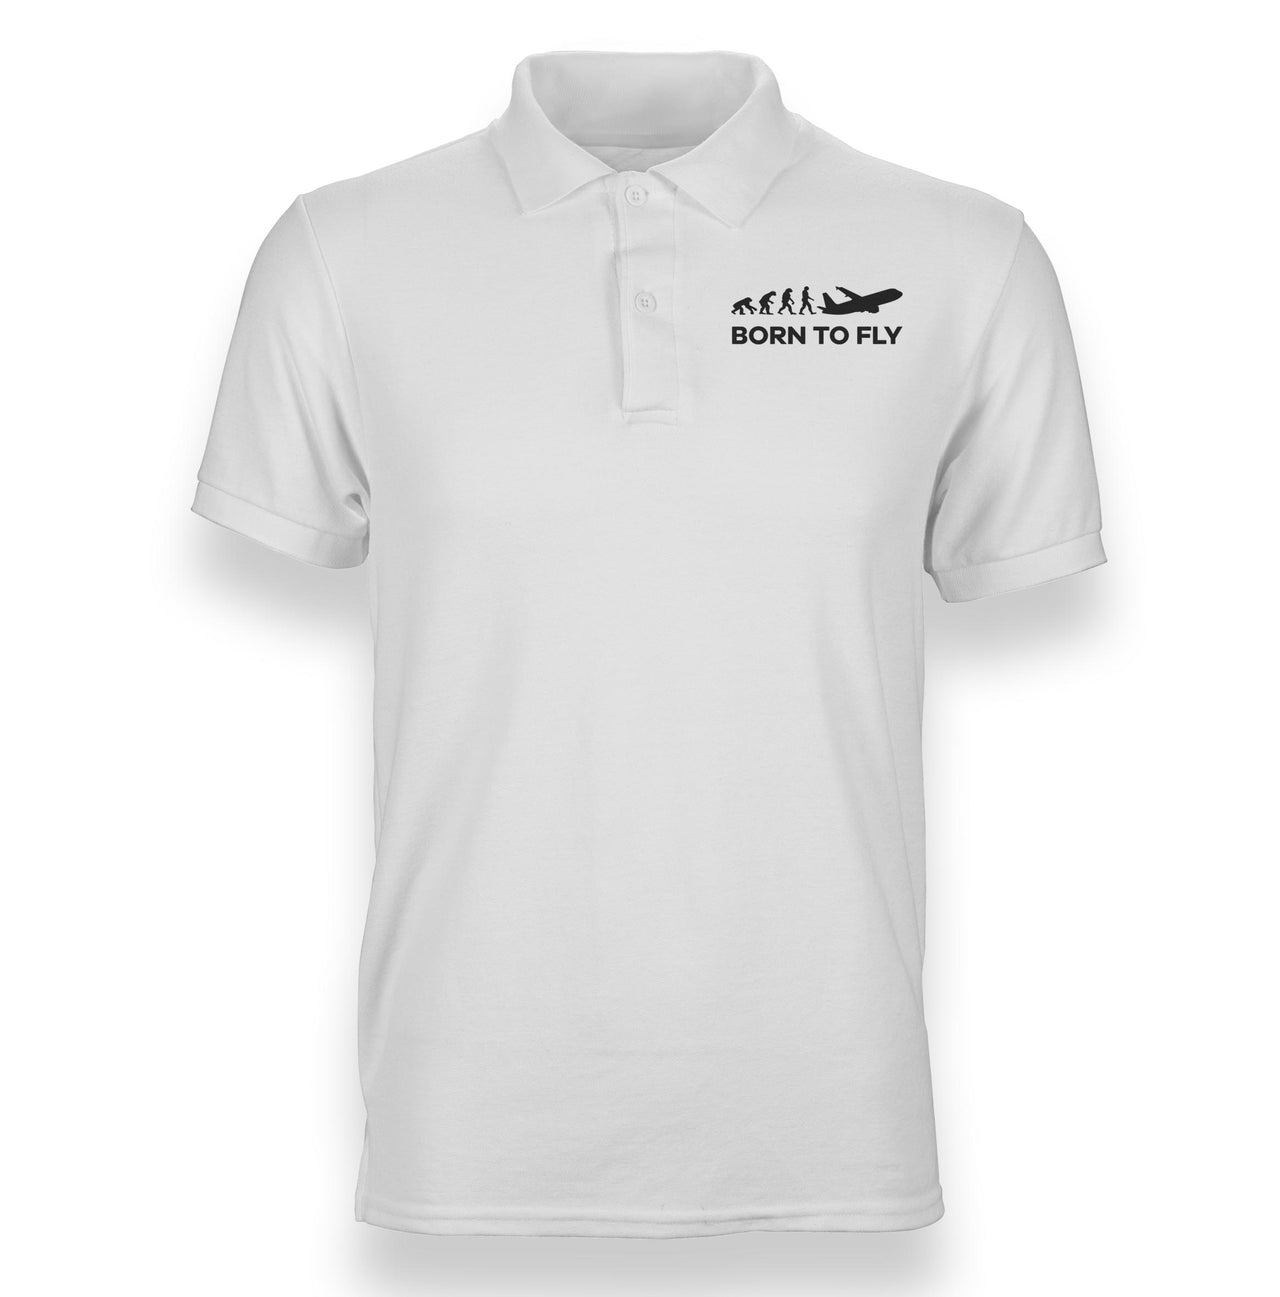 Born To Fly Designed Polo T-Shirts